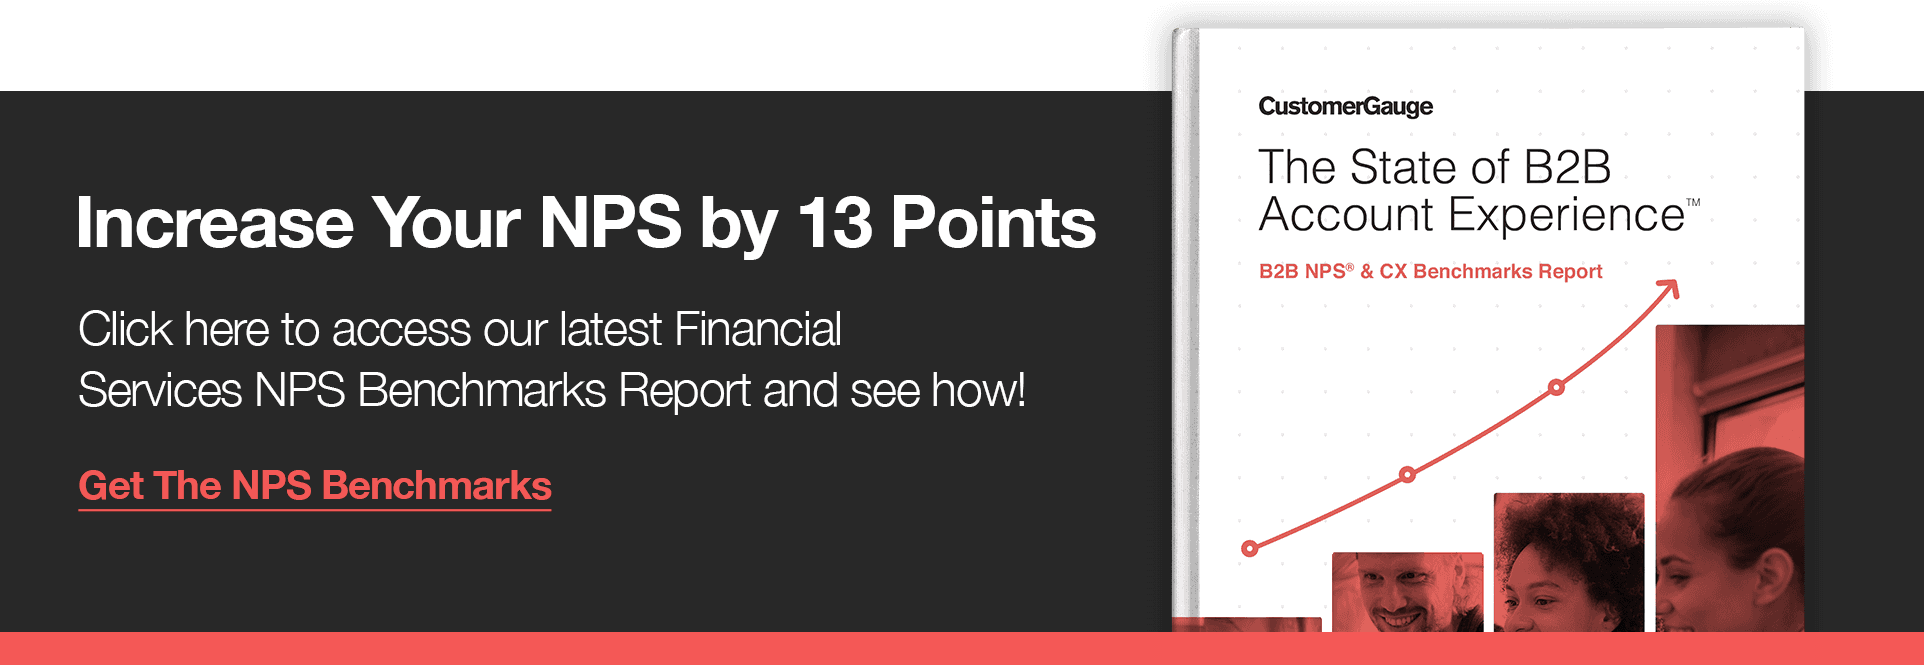 Financial Services NPS Benchmarks Report 